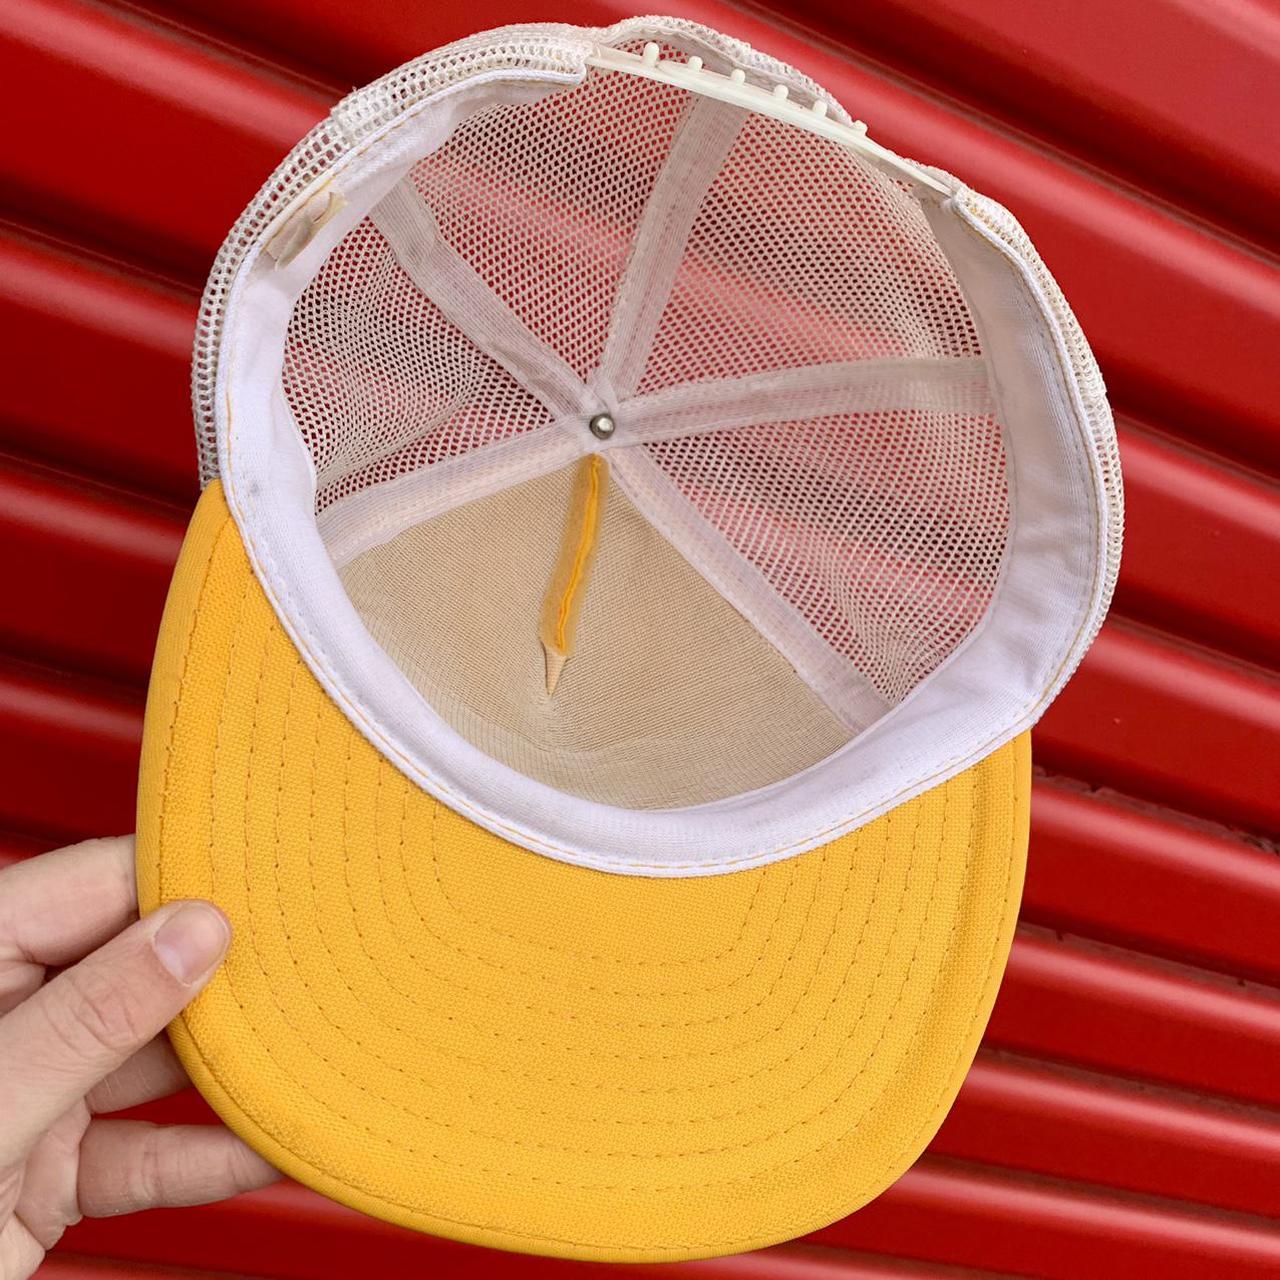 Product Image 3 - VINTAGE TACO TIME SNAPBACK 💛🌮

SUCH